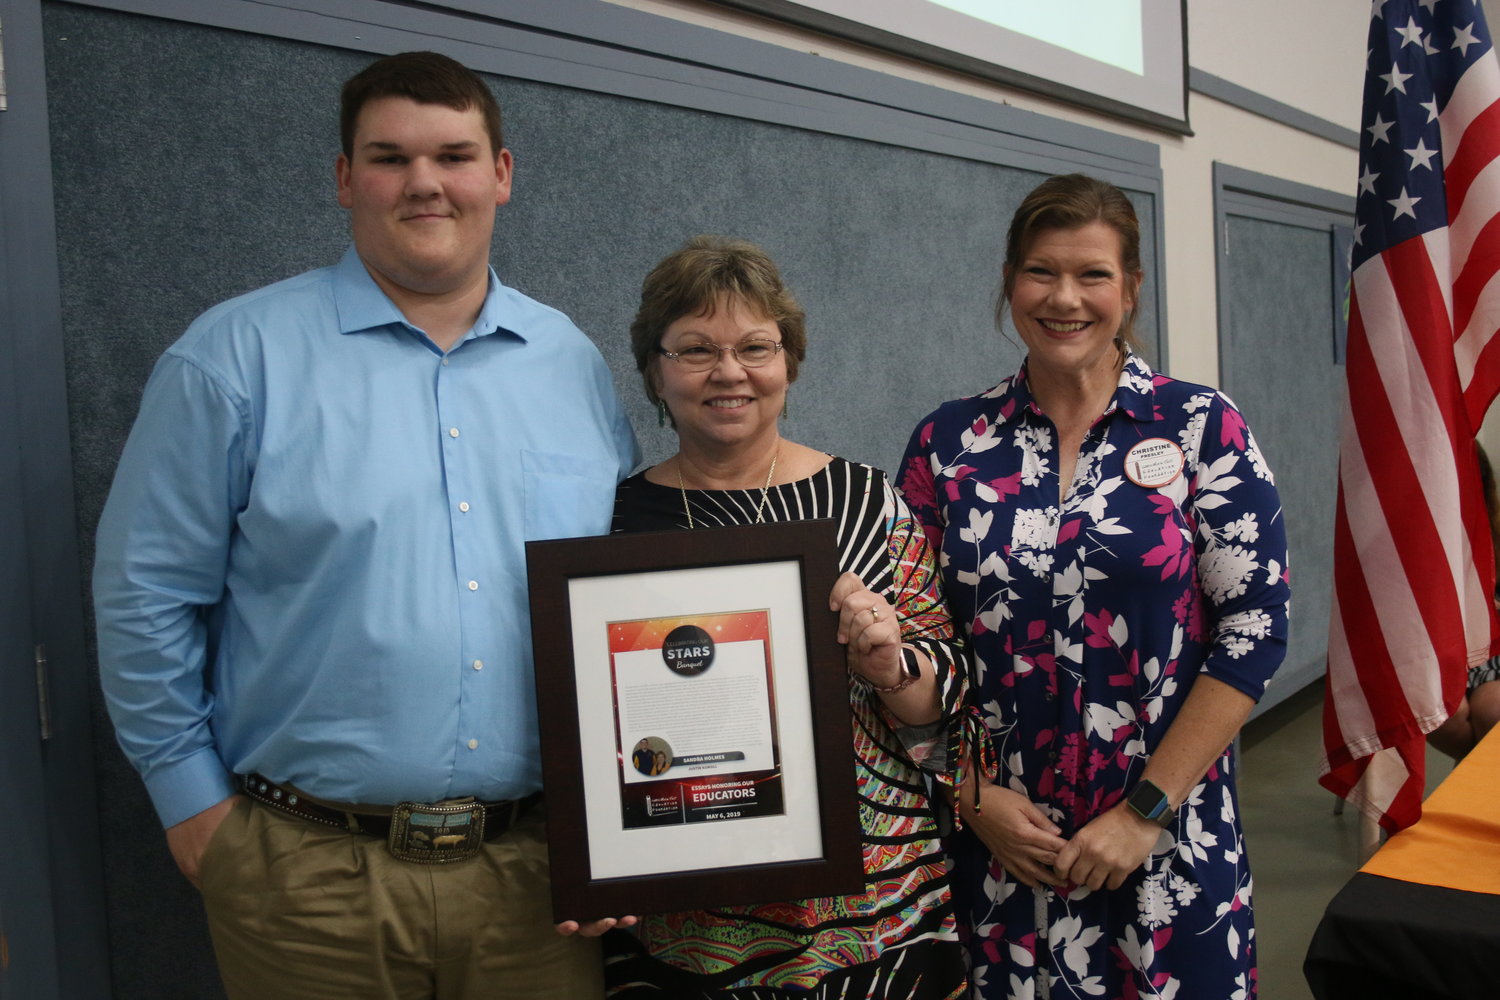 Justin Komoll recognized Sandra Holmes who taught him how to be a leader. “Throughout my years at GHS, I have served over 350 hours in the Anchor Club and Mrs. Holmes was there for every single one of them.”